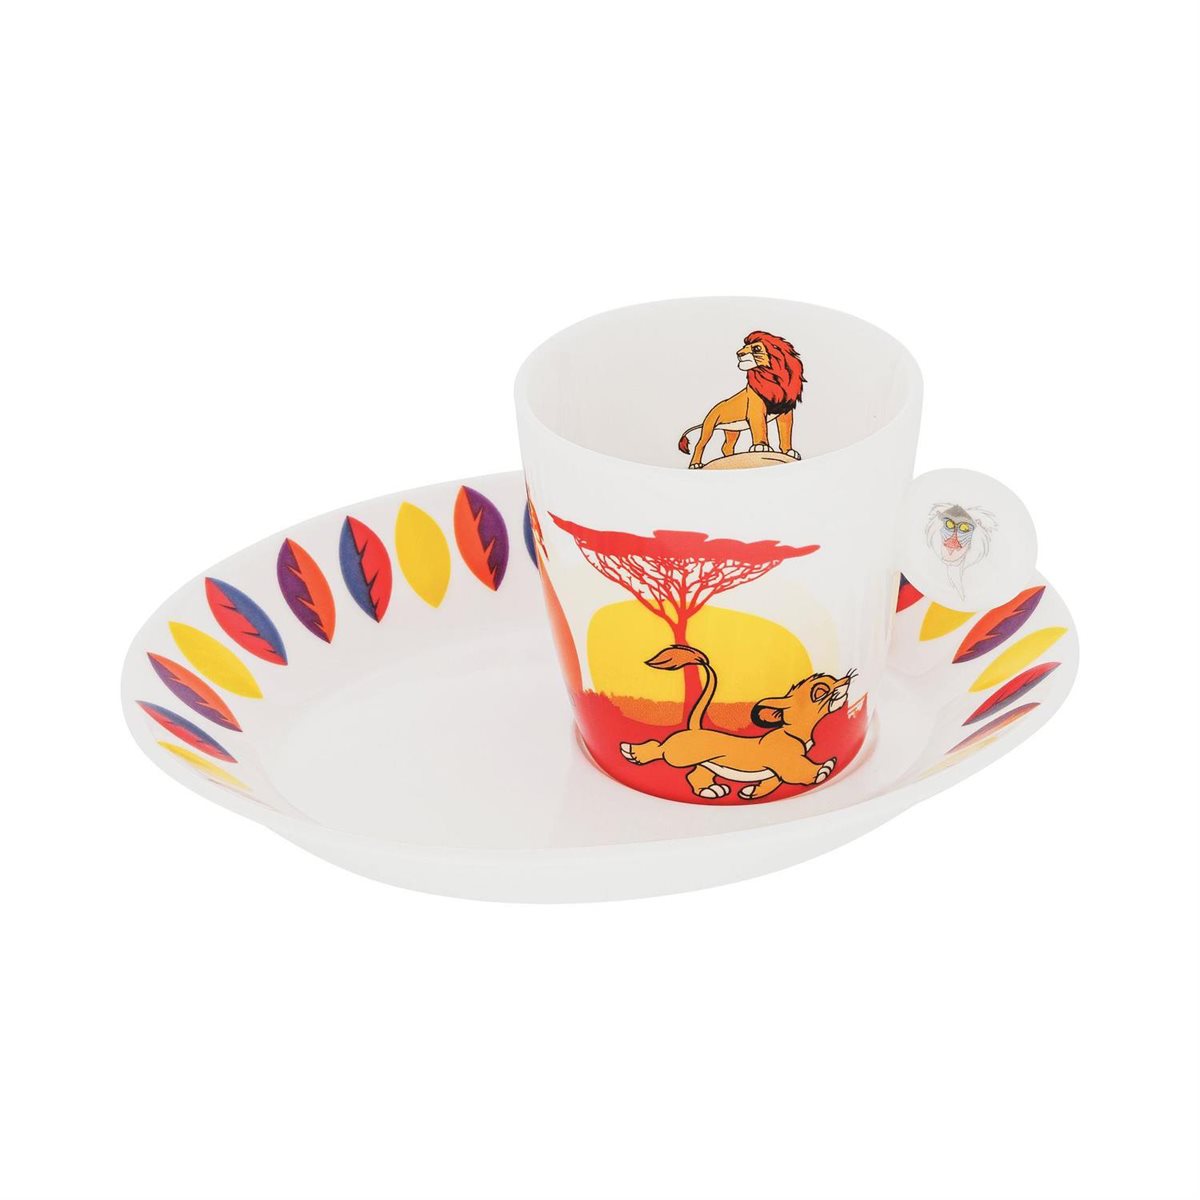 Disney English Ladies The Lion King Espresso Cup and Saucer Set